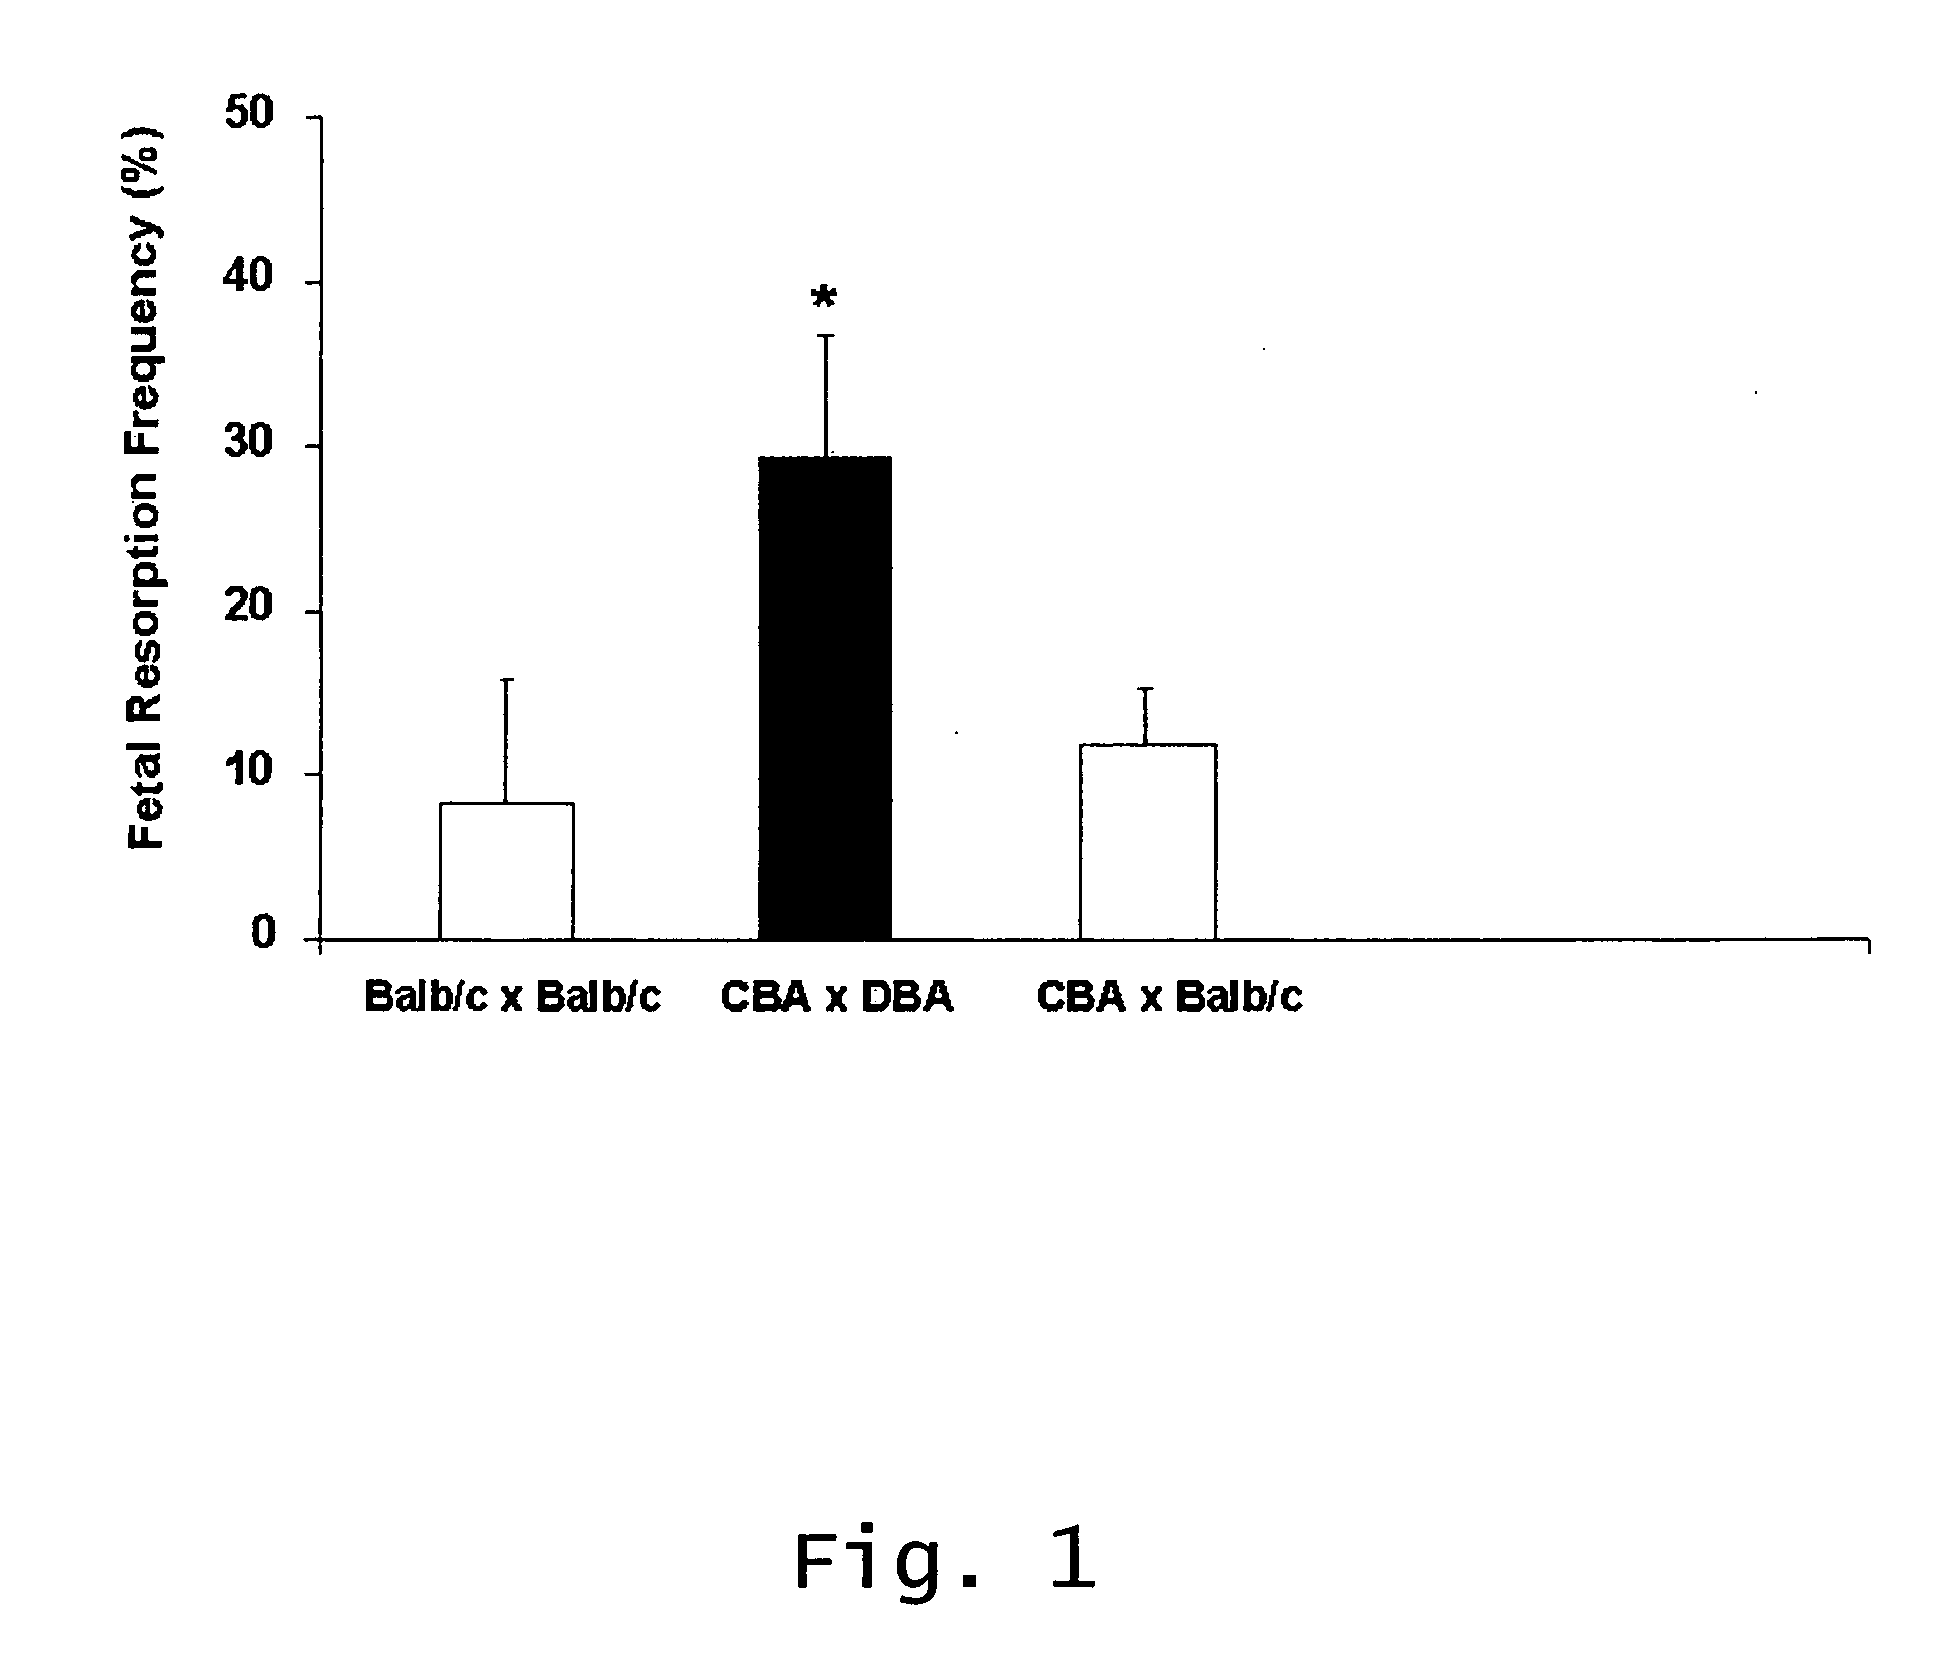 Method of treating recurrent miscarriages